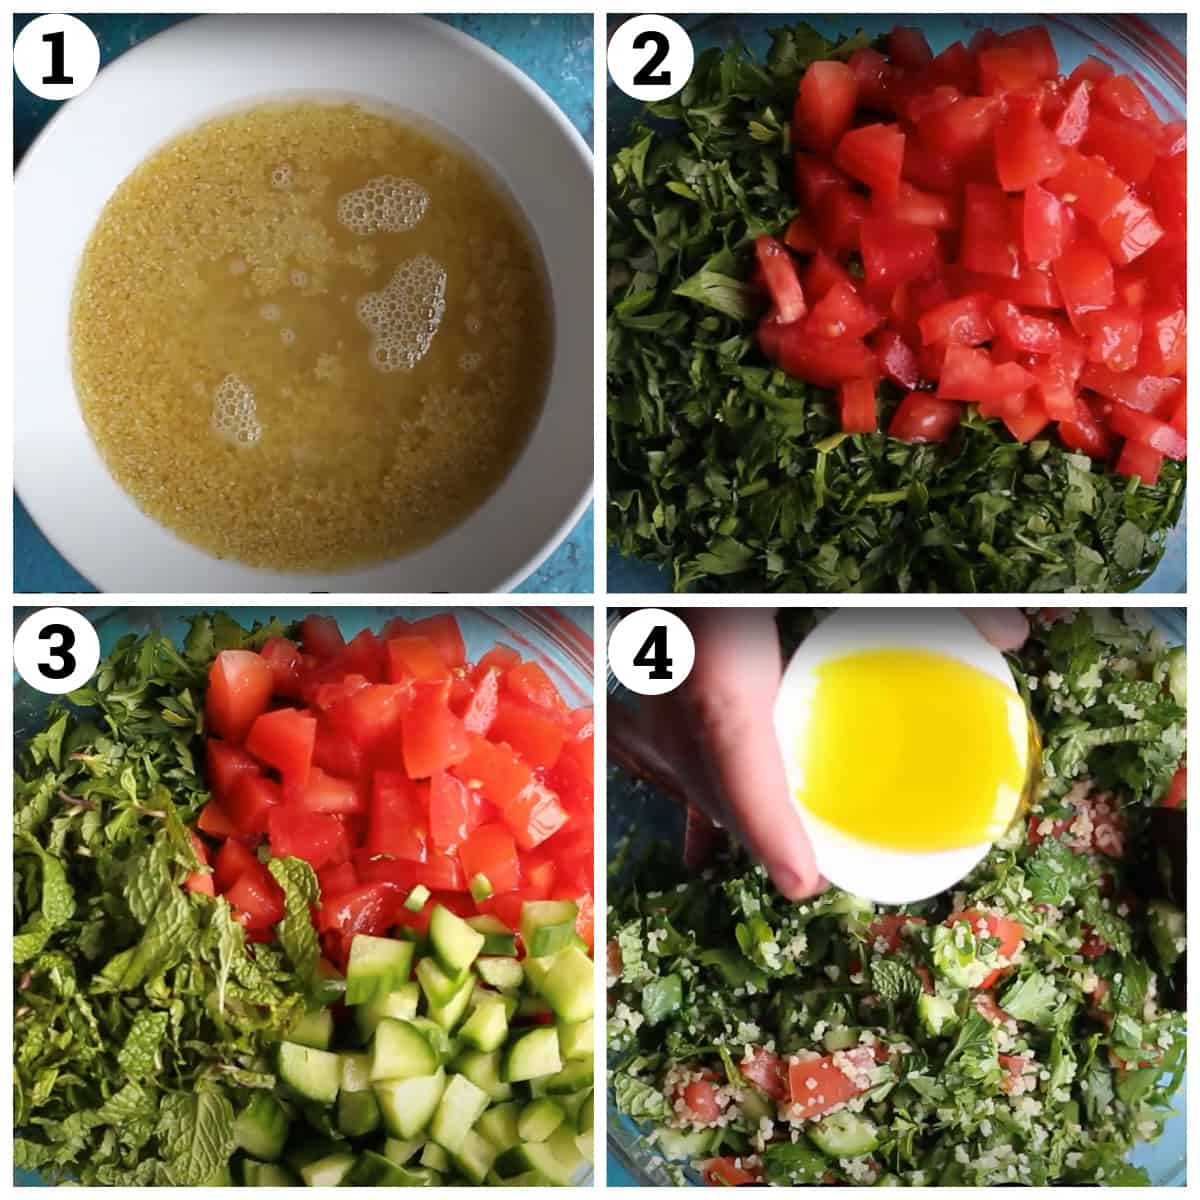 soak the bulgur in water, add the herbs and tomatoes. add the dressing.